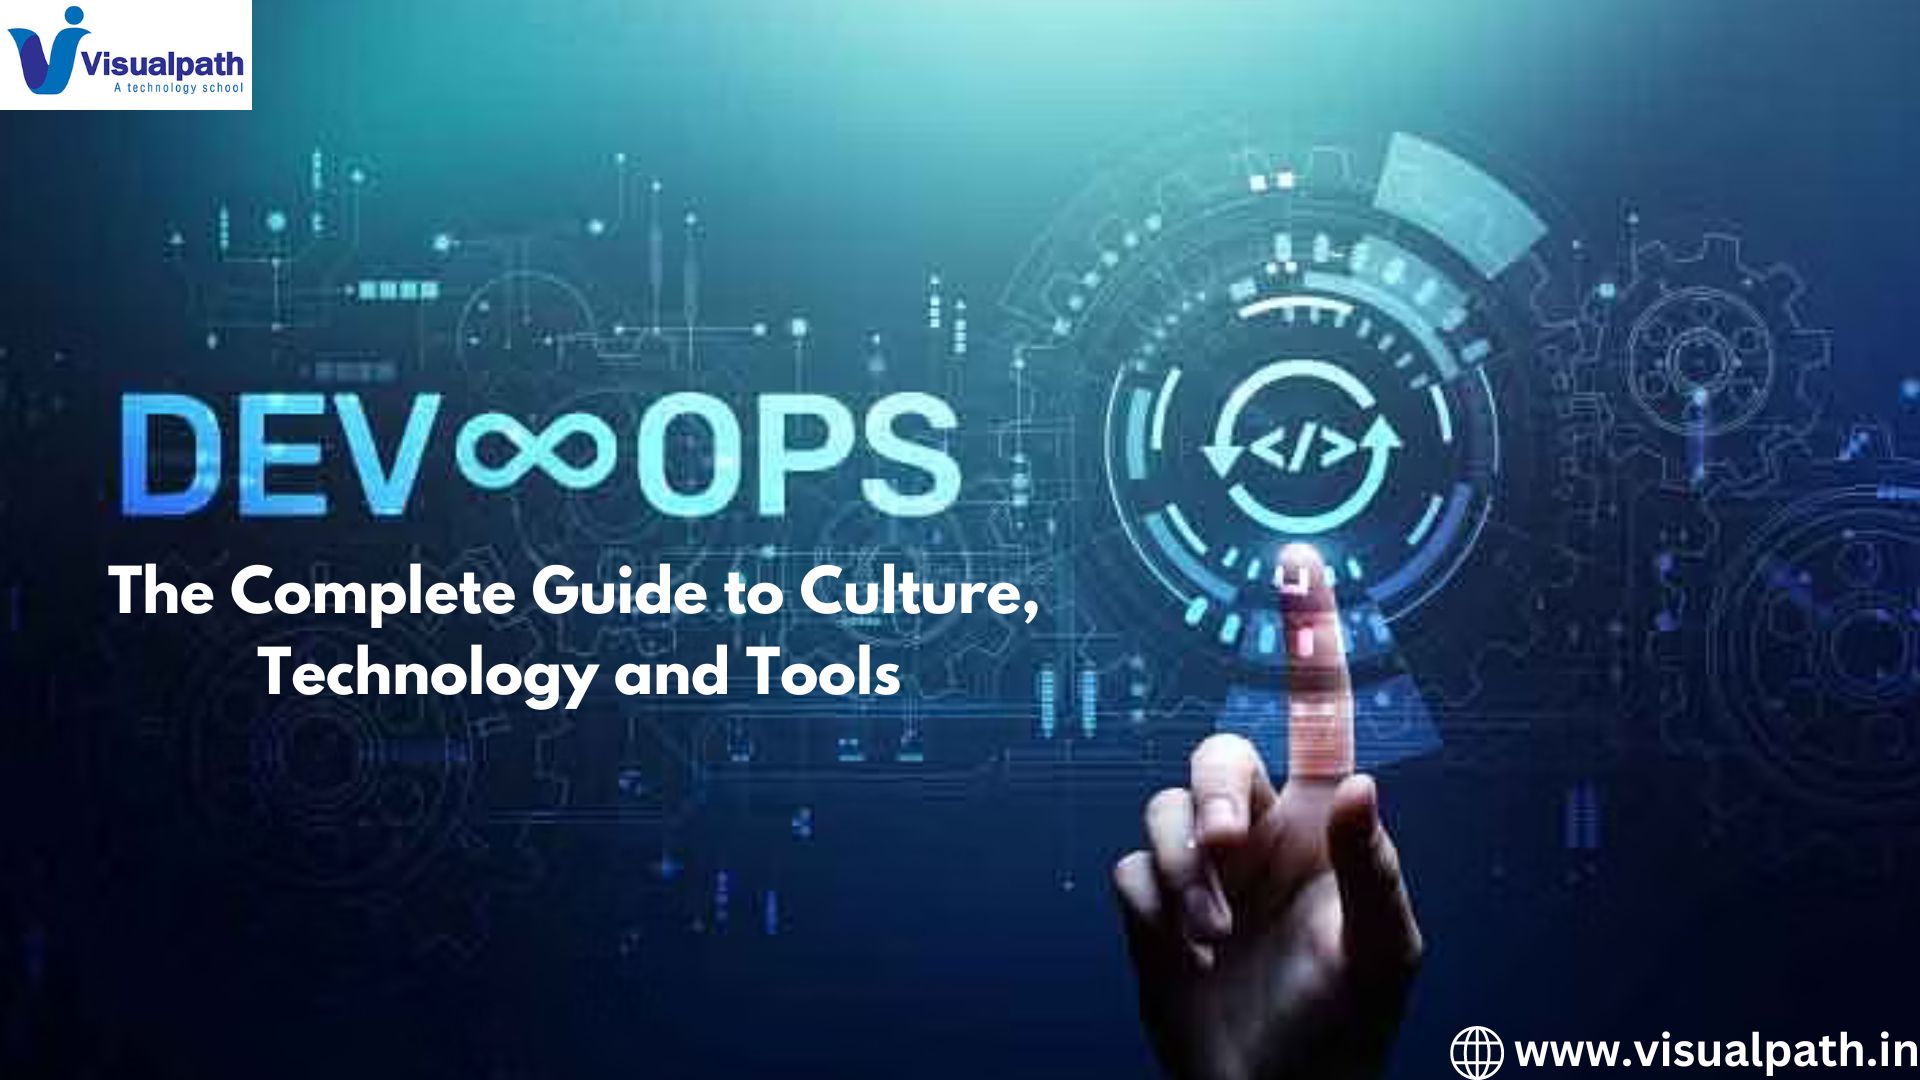 DevOps: The Complete Guide to Culture, Technology, and Tools